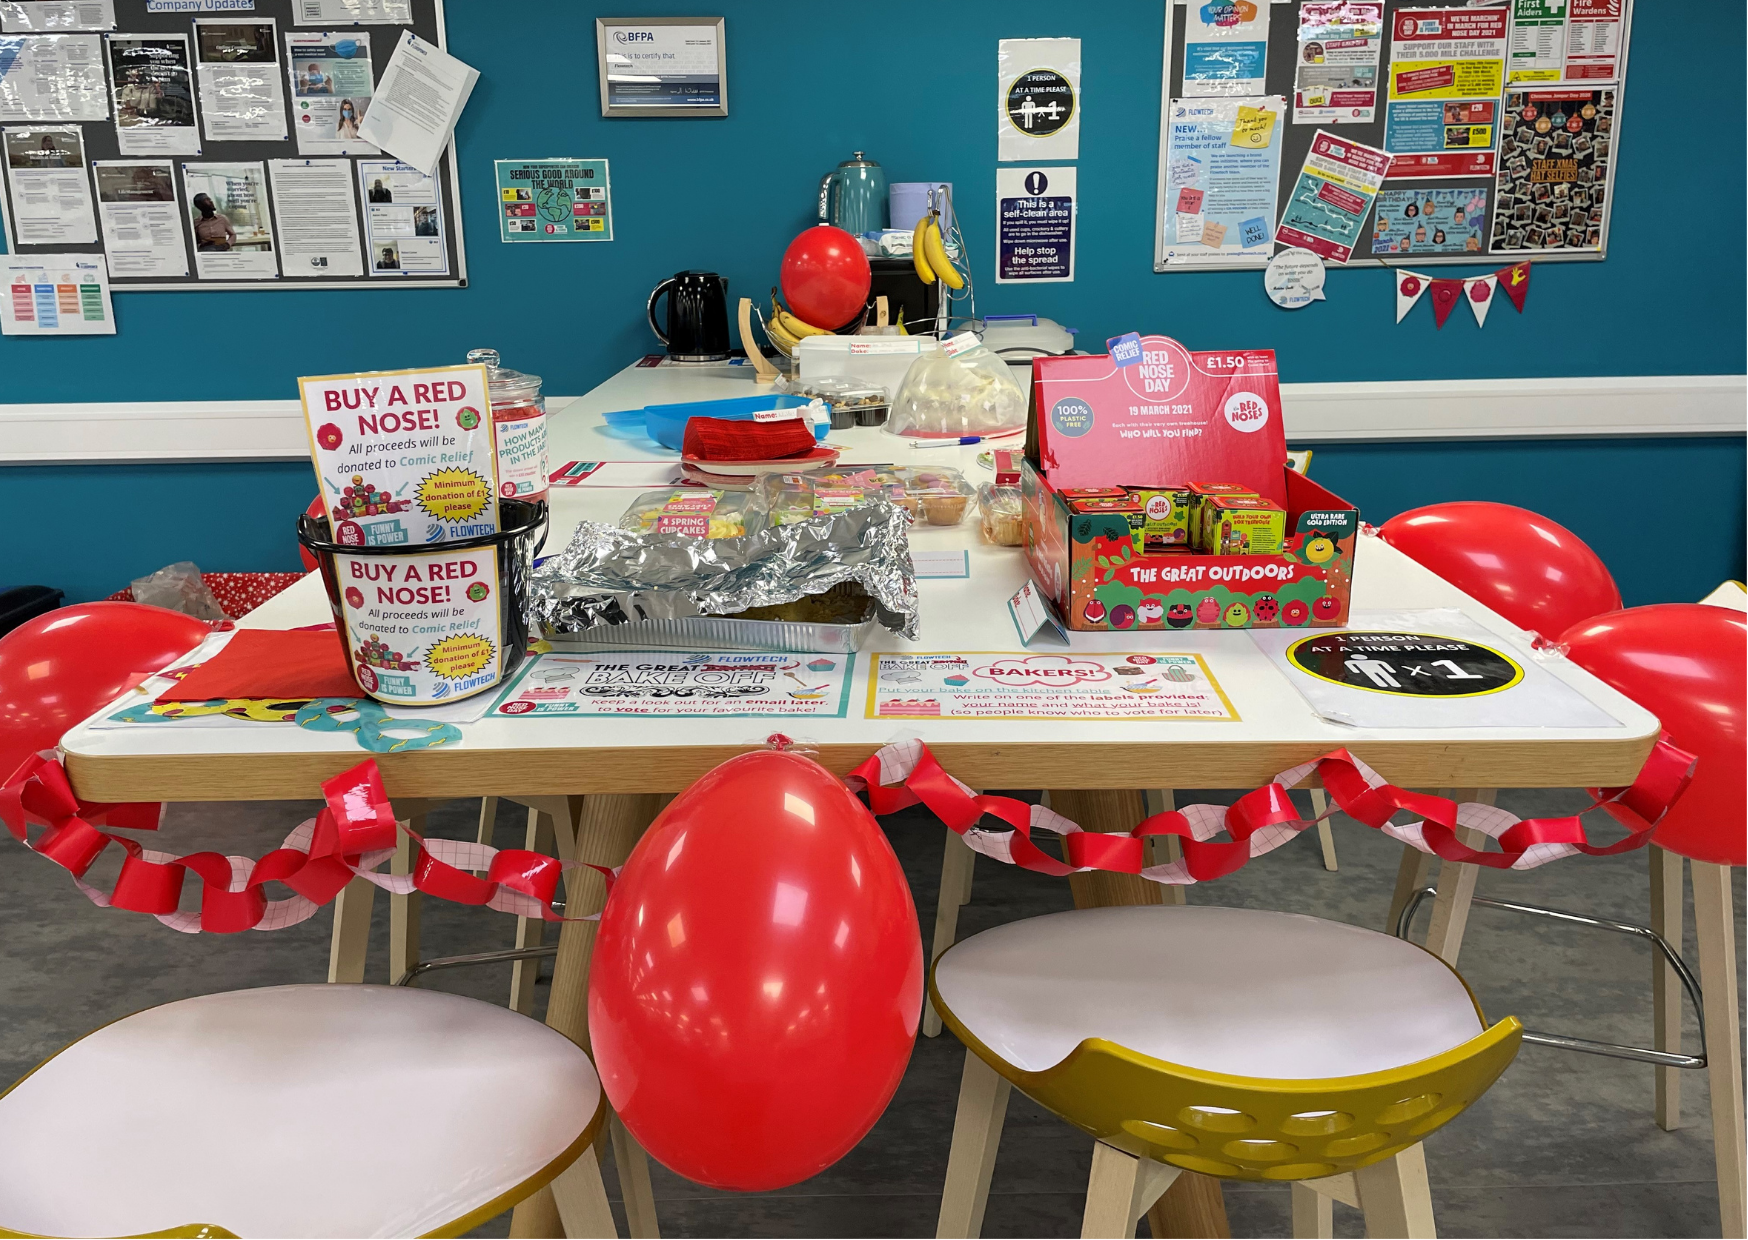 The red nose day table, in the kitchen area